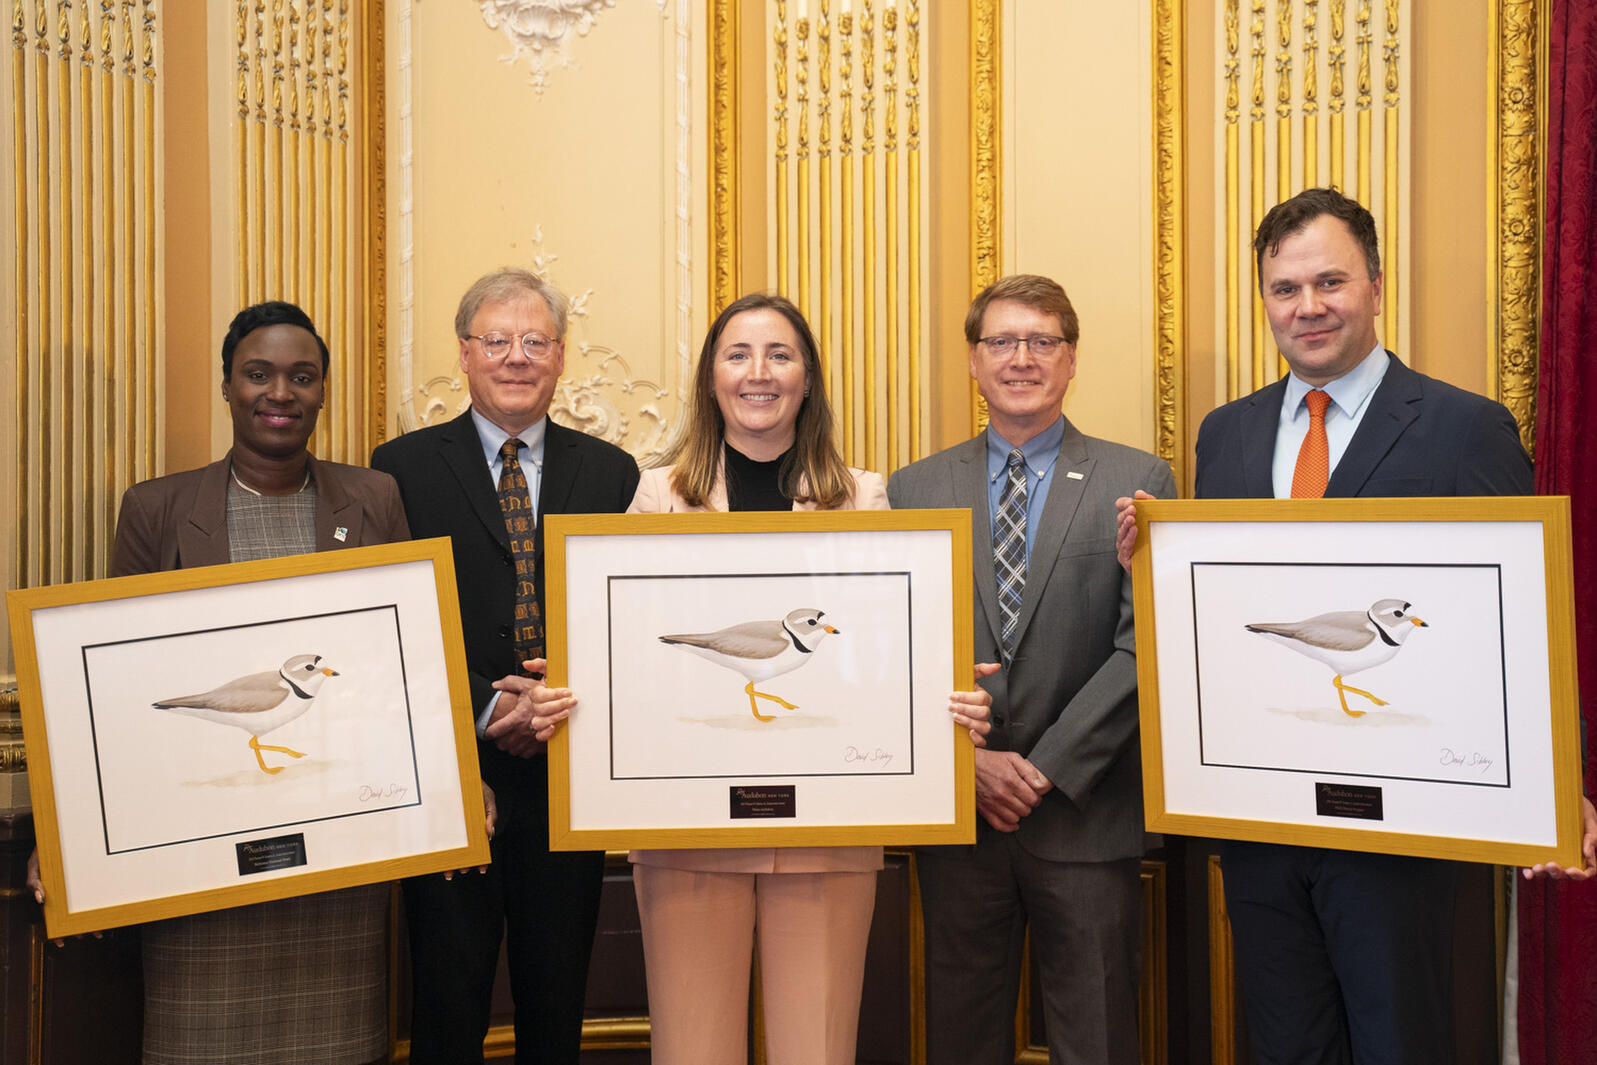 Five people stand against a gold wall and red curtains, the four honorees plus the executive director of Audubon CT and NY. Three honorees hold framed awards with a Sibley-drawn plover inside. David Sibley stands second from left.